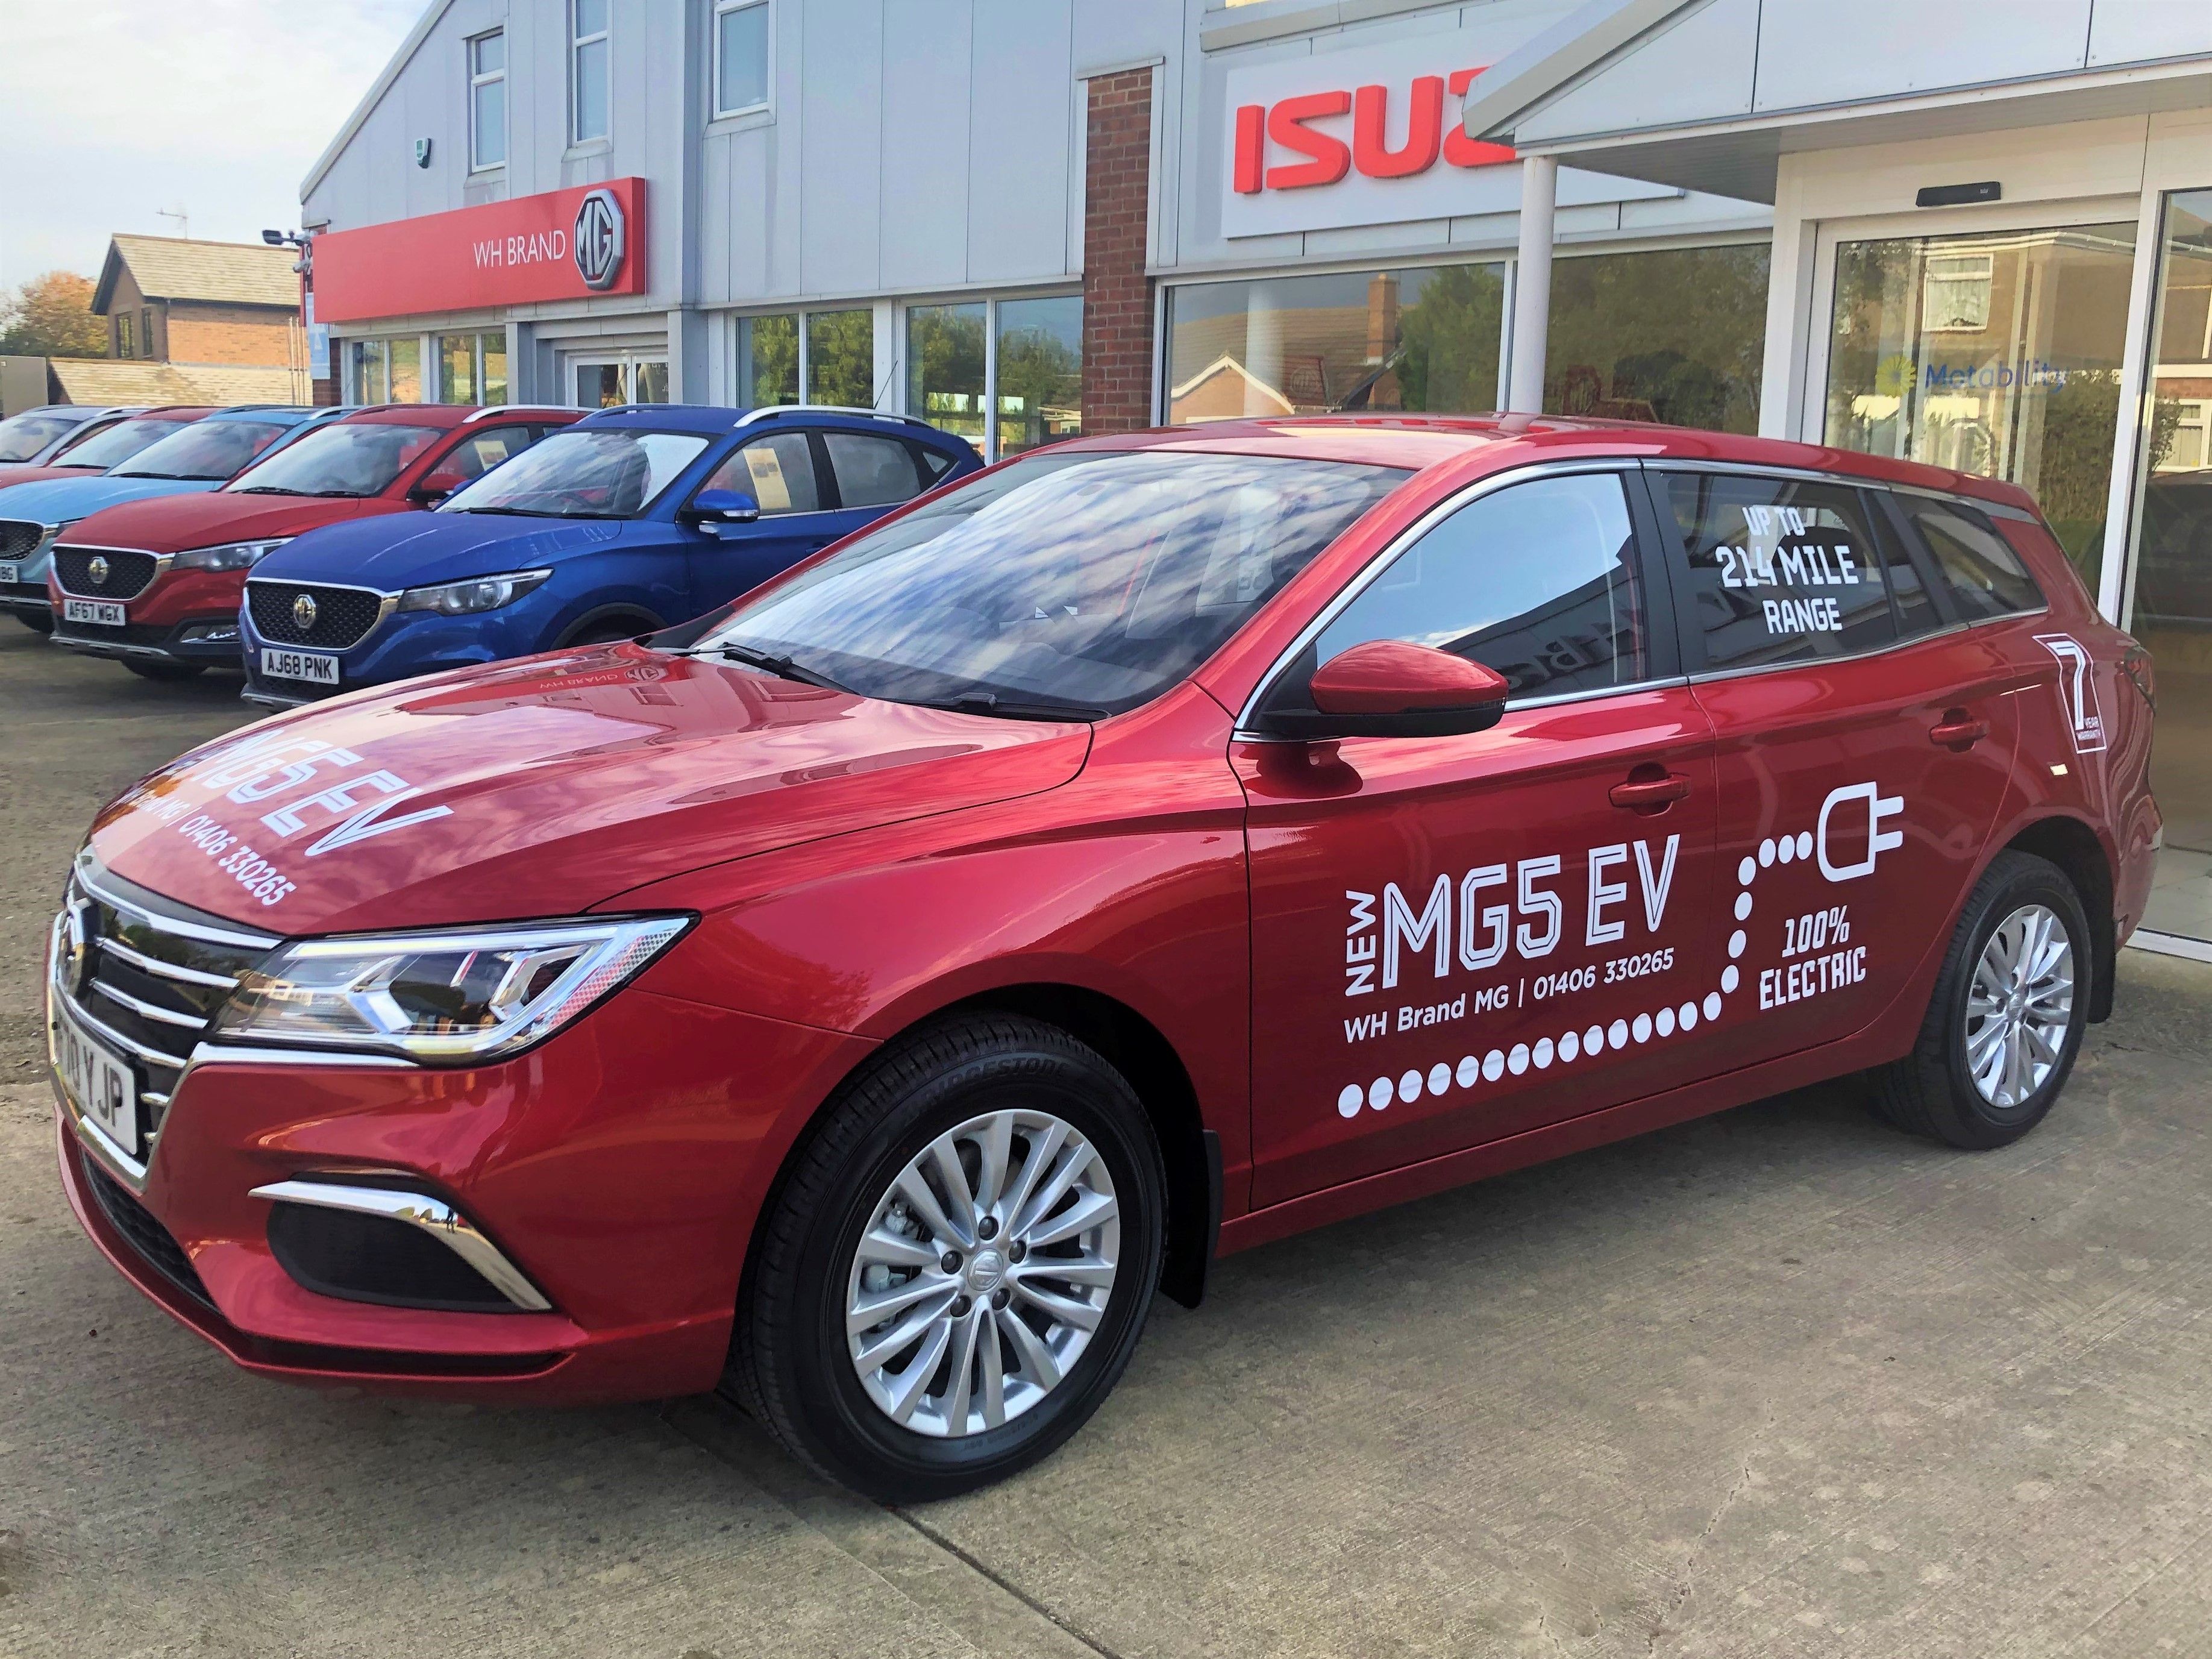 The All-New MG5 EV is here!